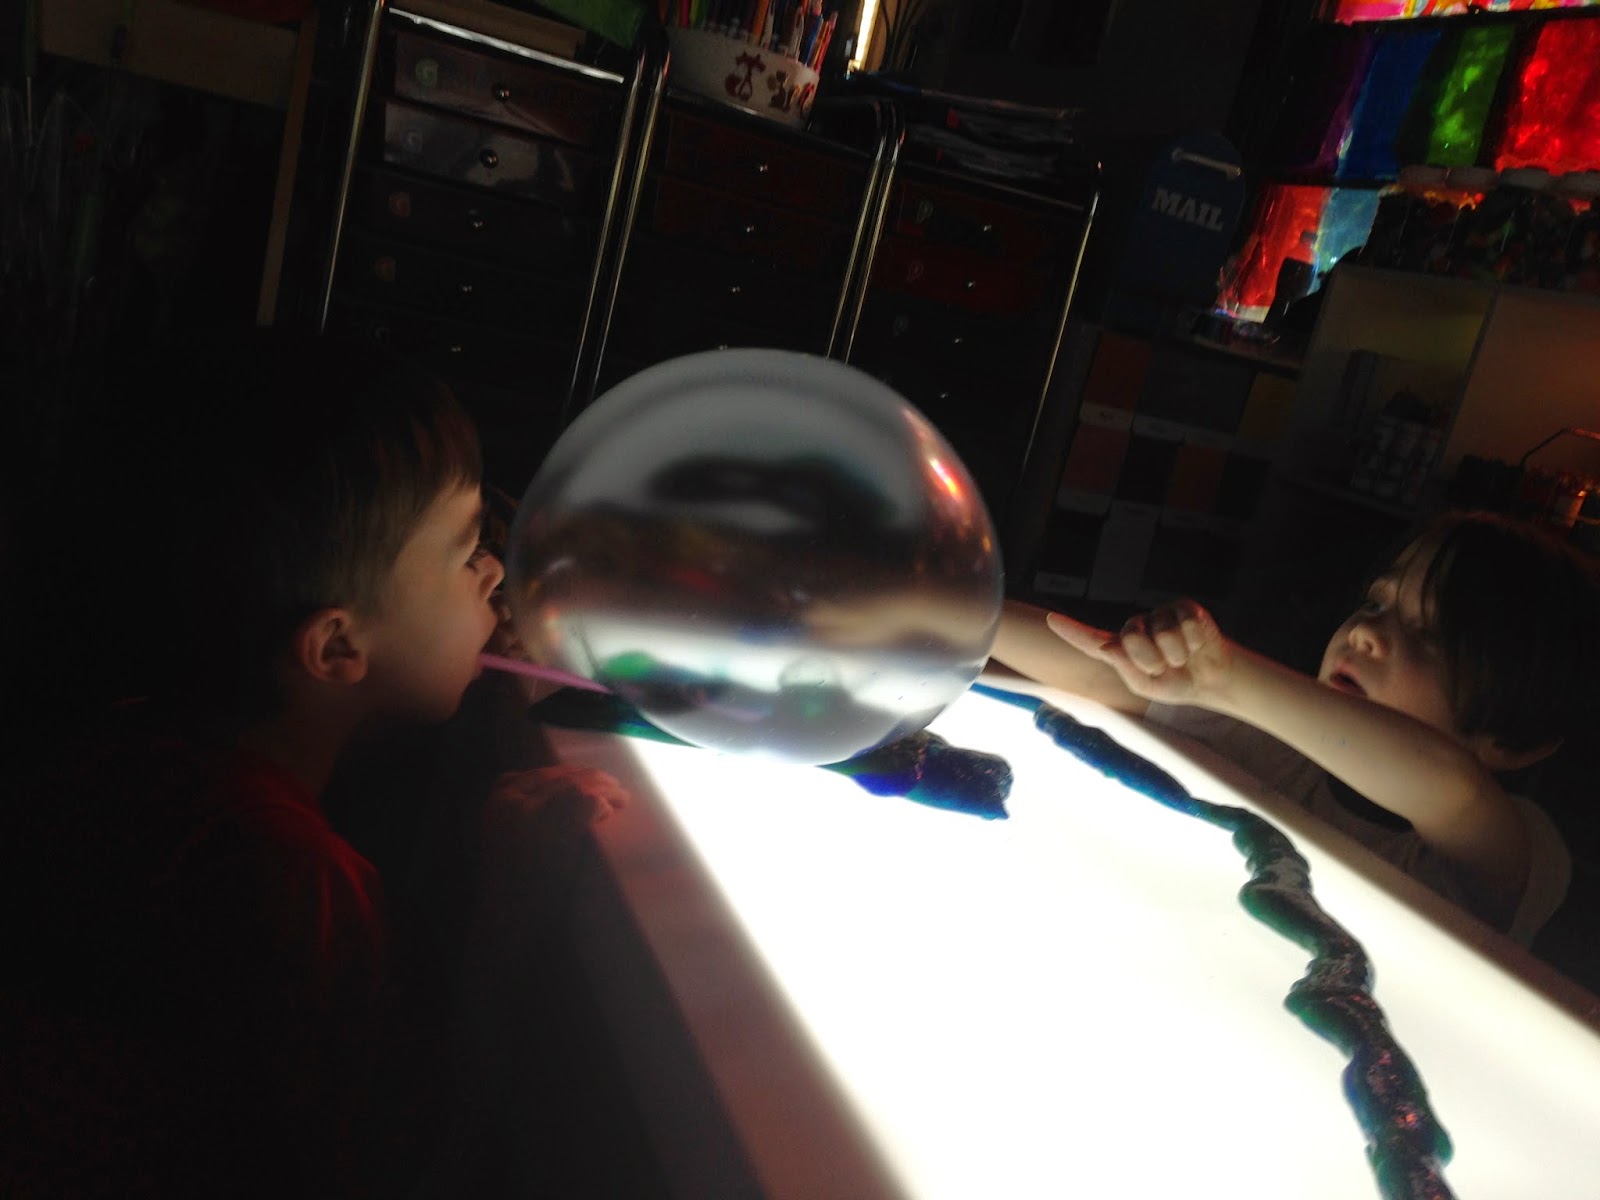 silly putty, straws, and light table